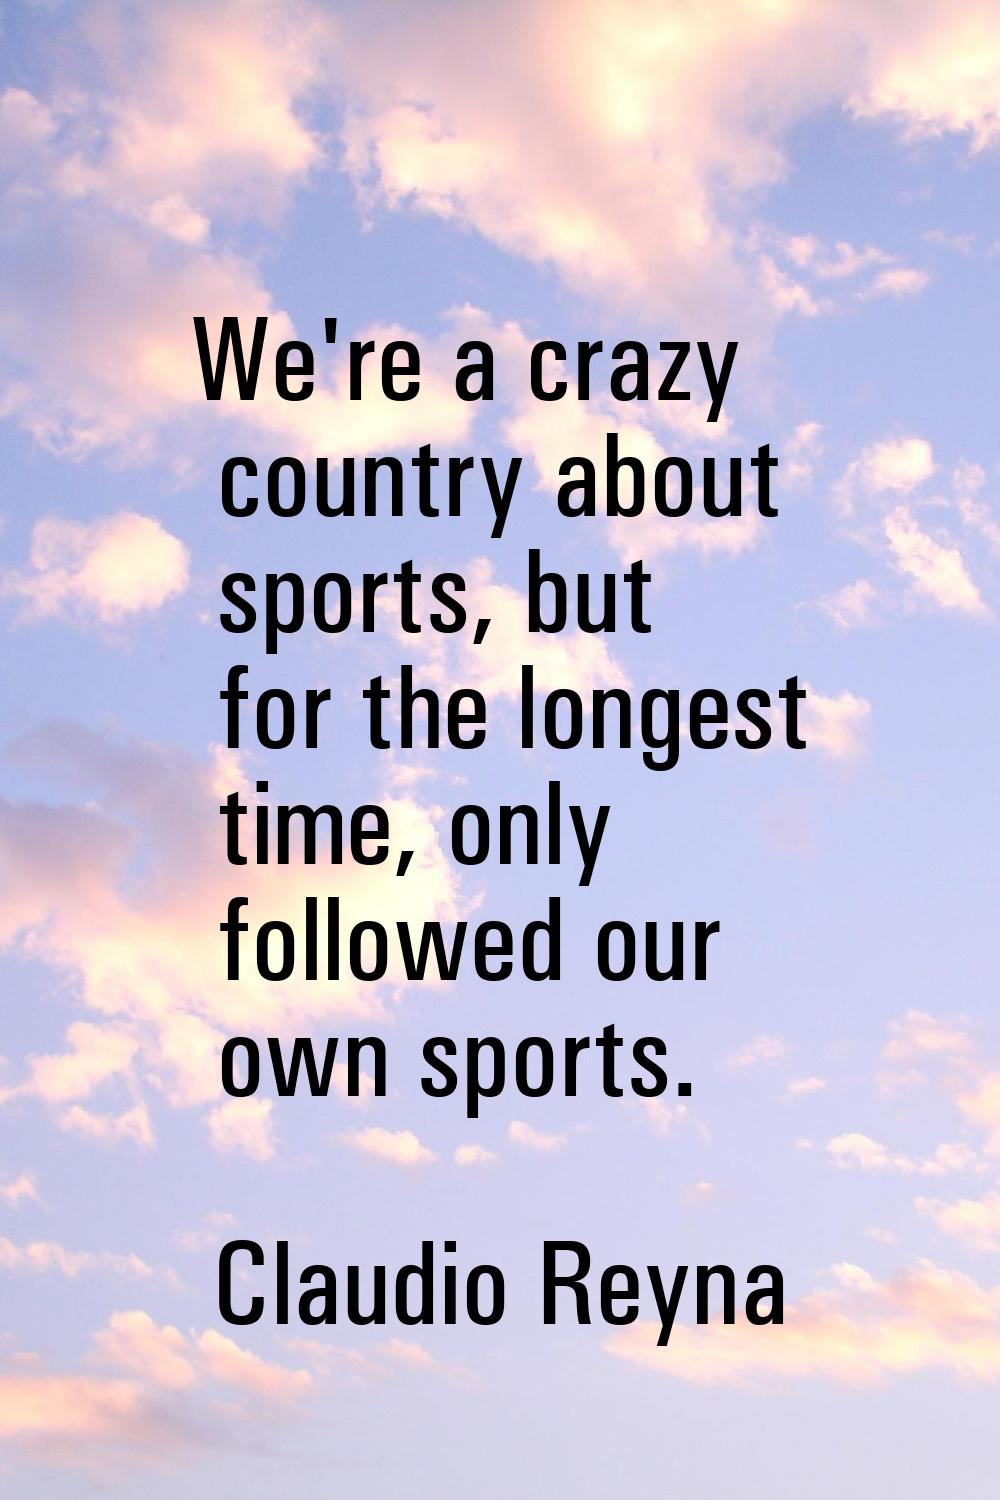 We're a crazy country about sports, but for the longest time, only followed our own sports.